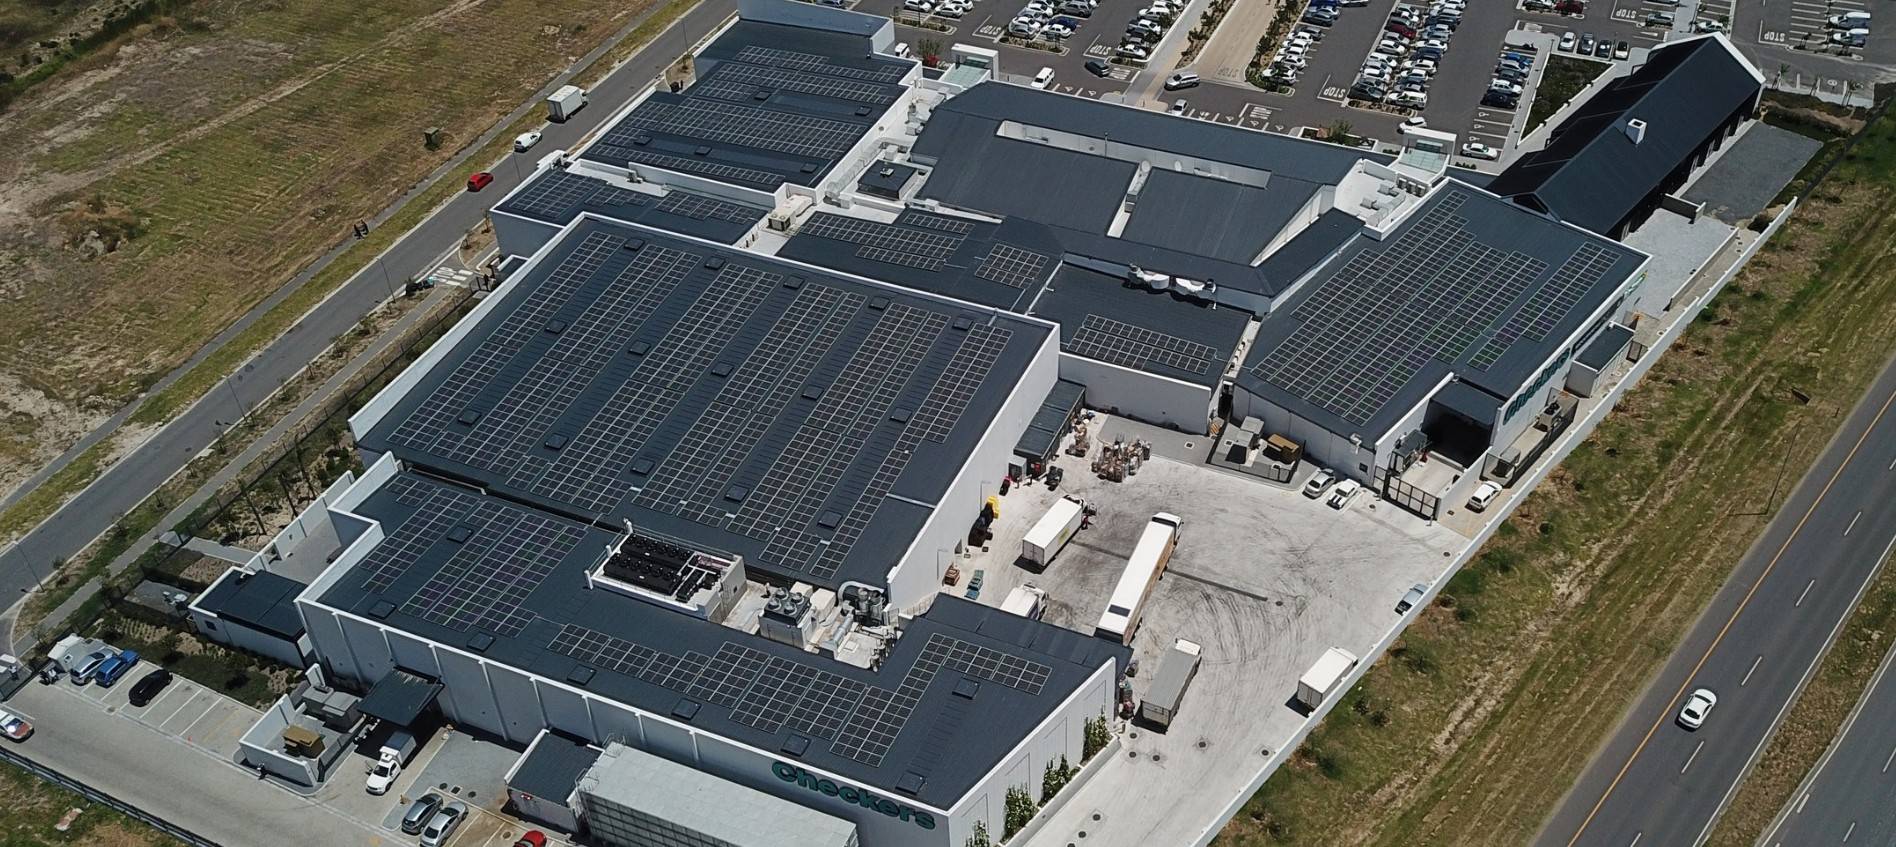 Shoprite has increased its solar capacity by 82%